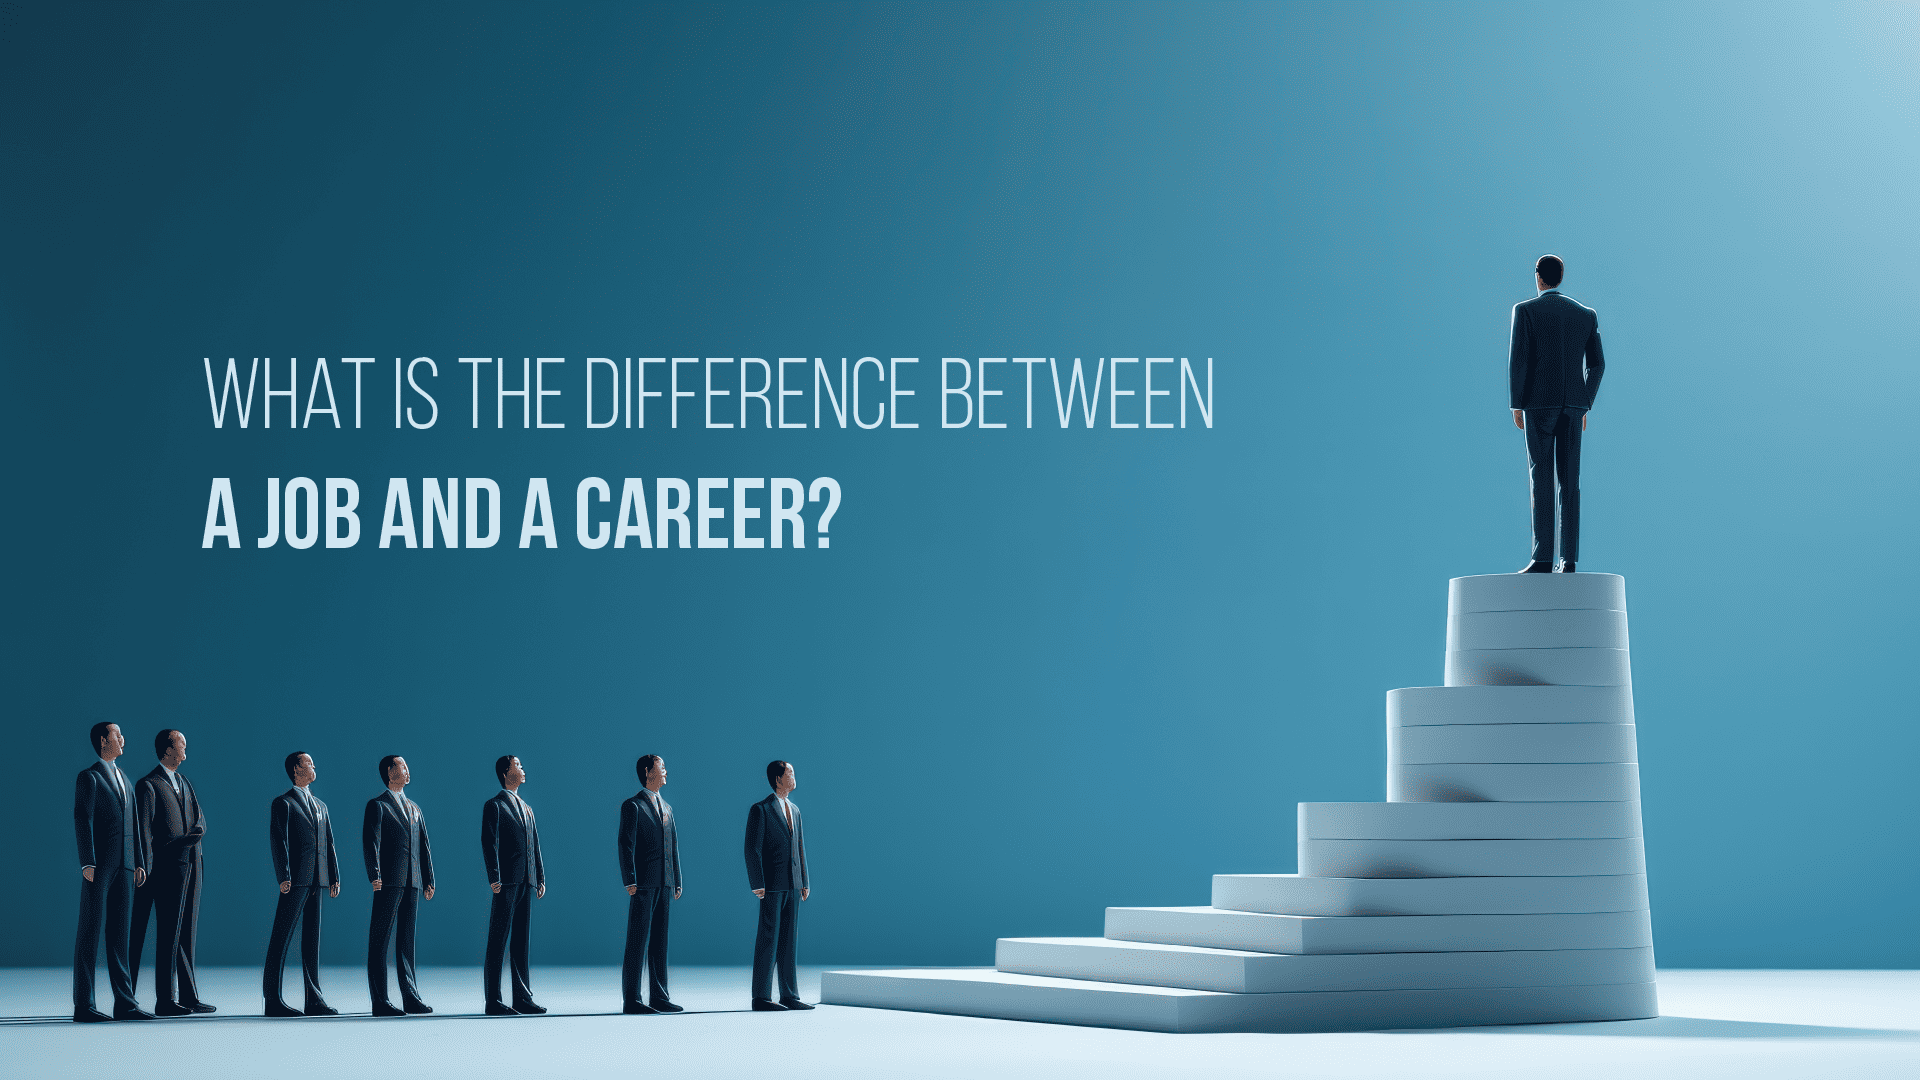 What Is The Difference Between A Job And A Career?